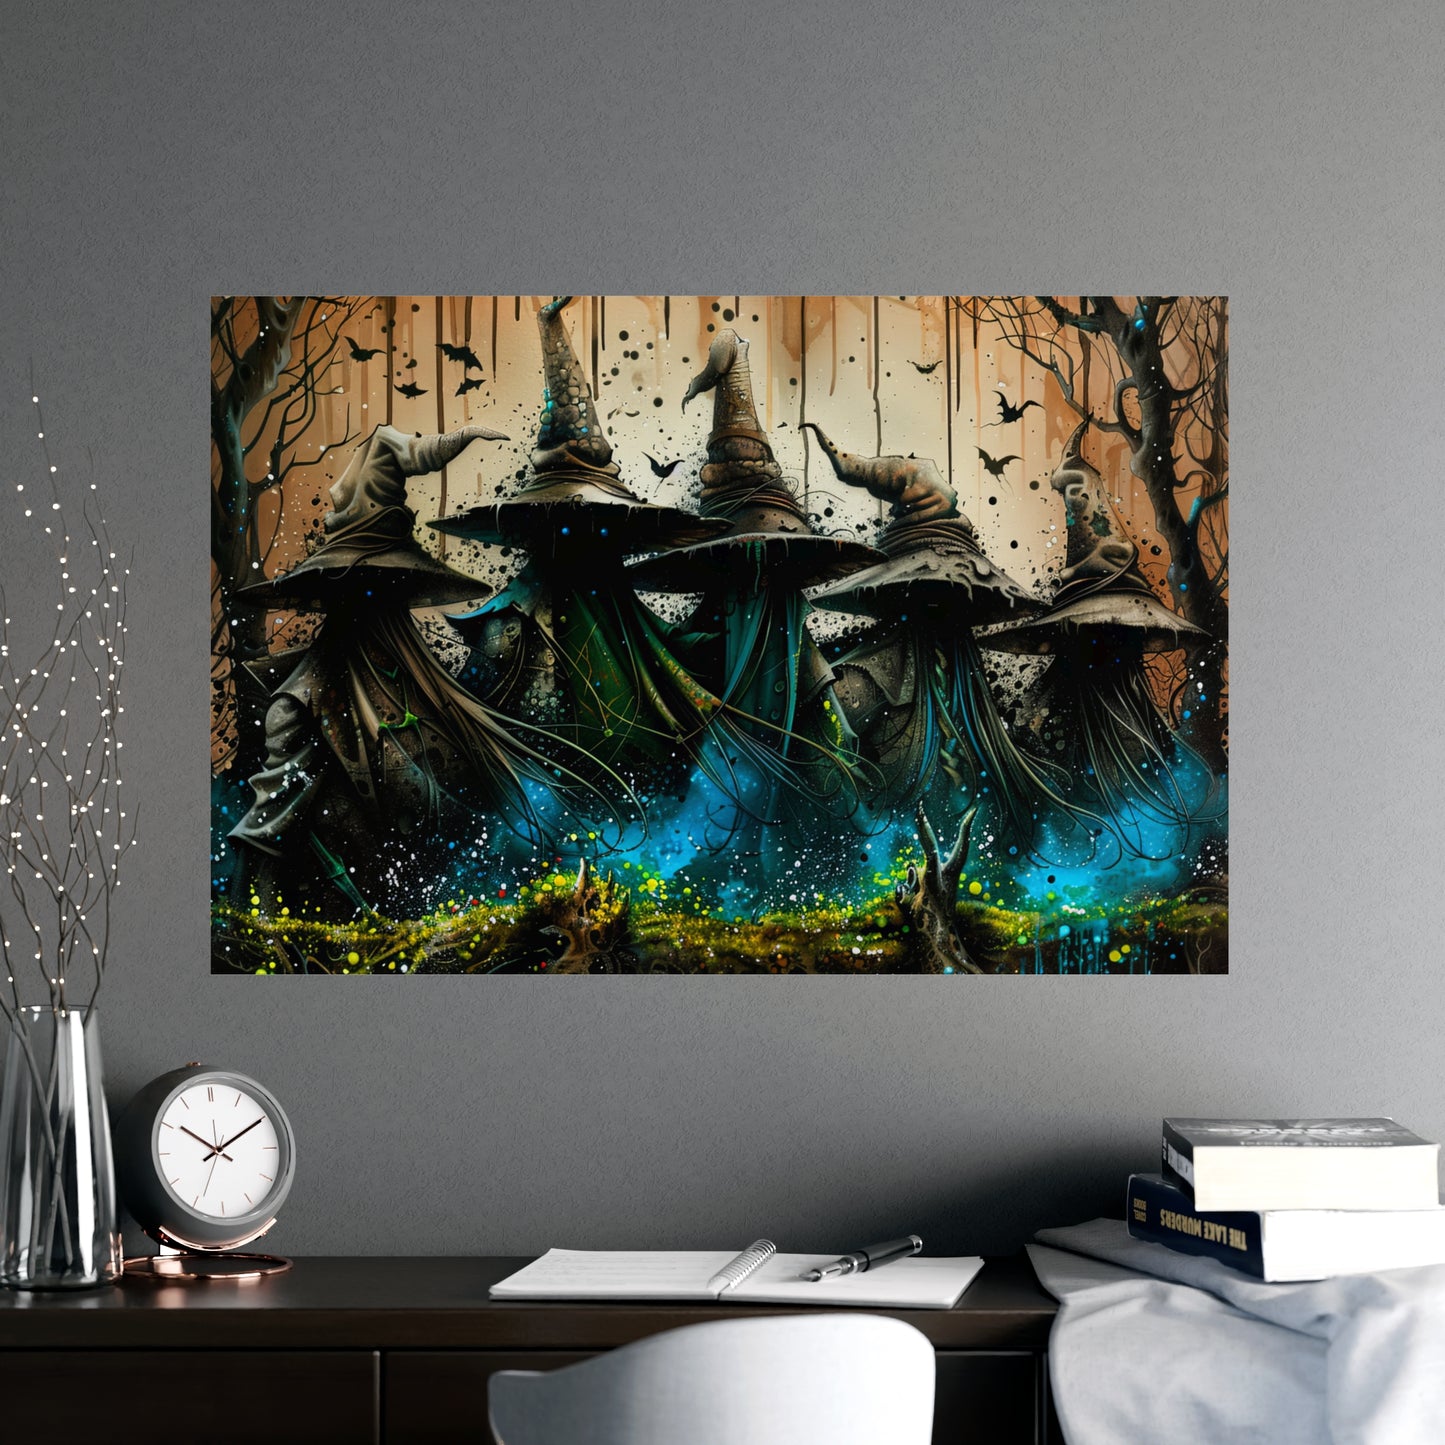 Horizontal Matte Poster: Witches and Wizards #2